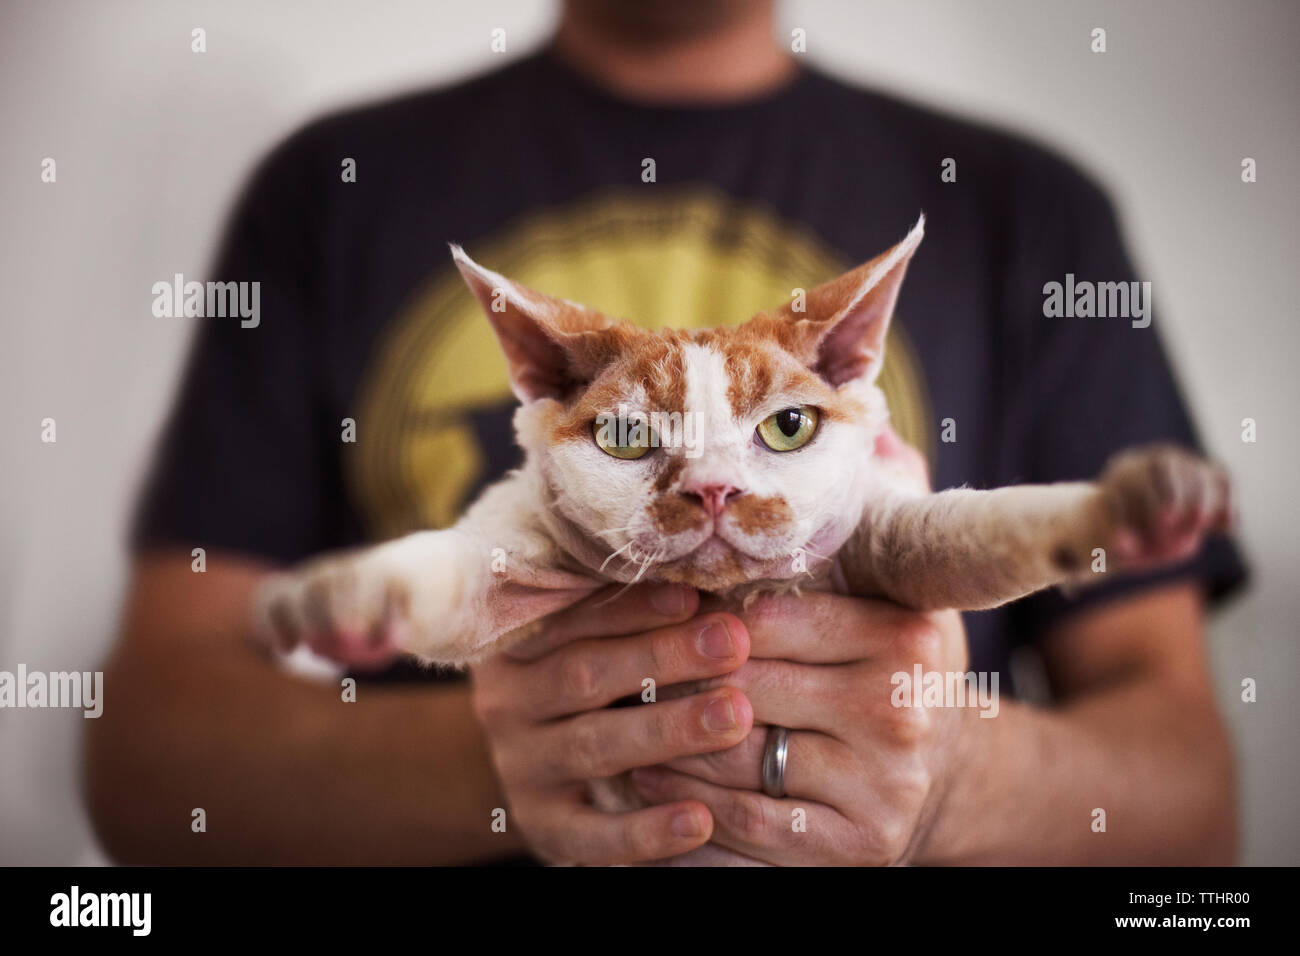 Midsection of man holding cat at home Stock Photo